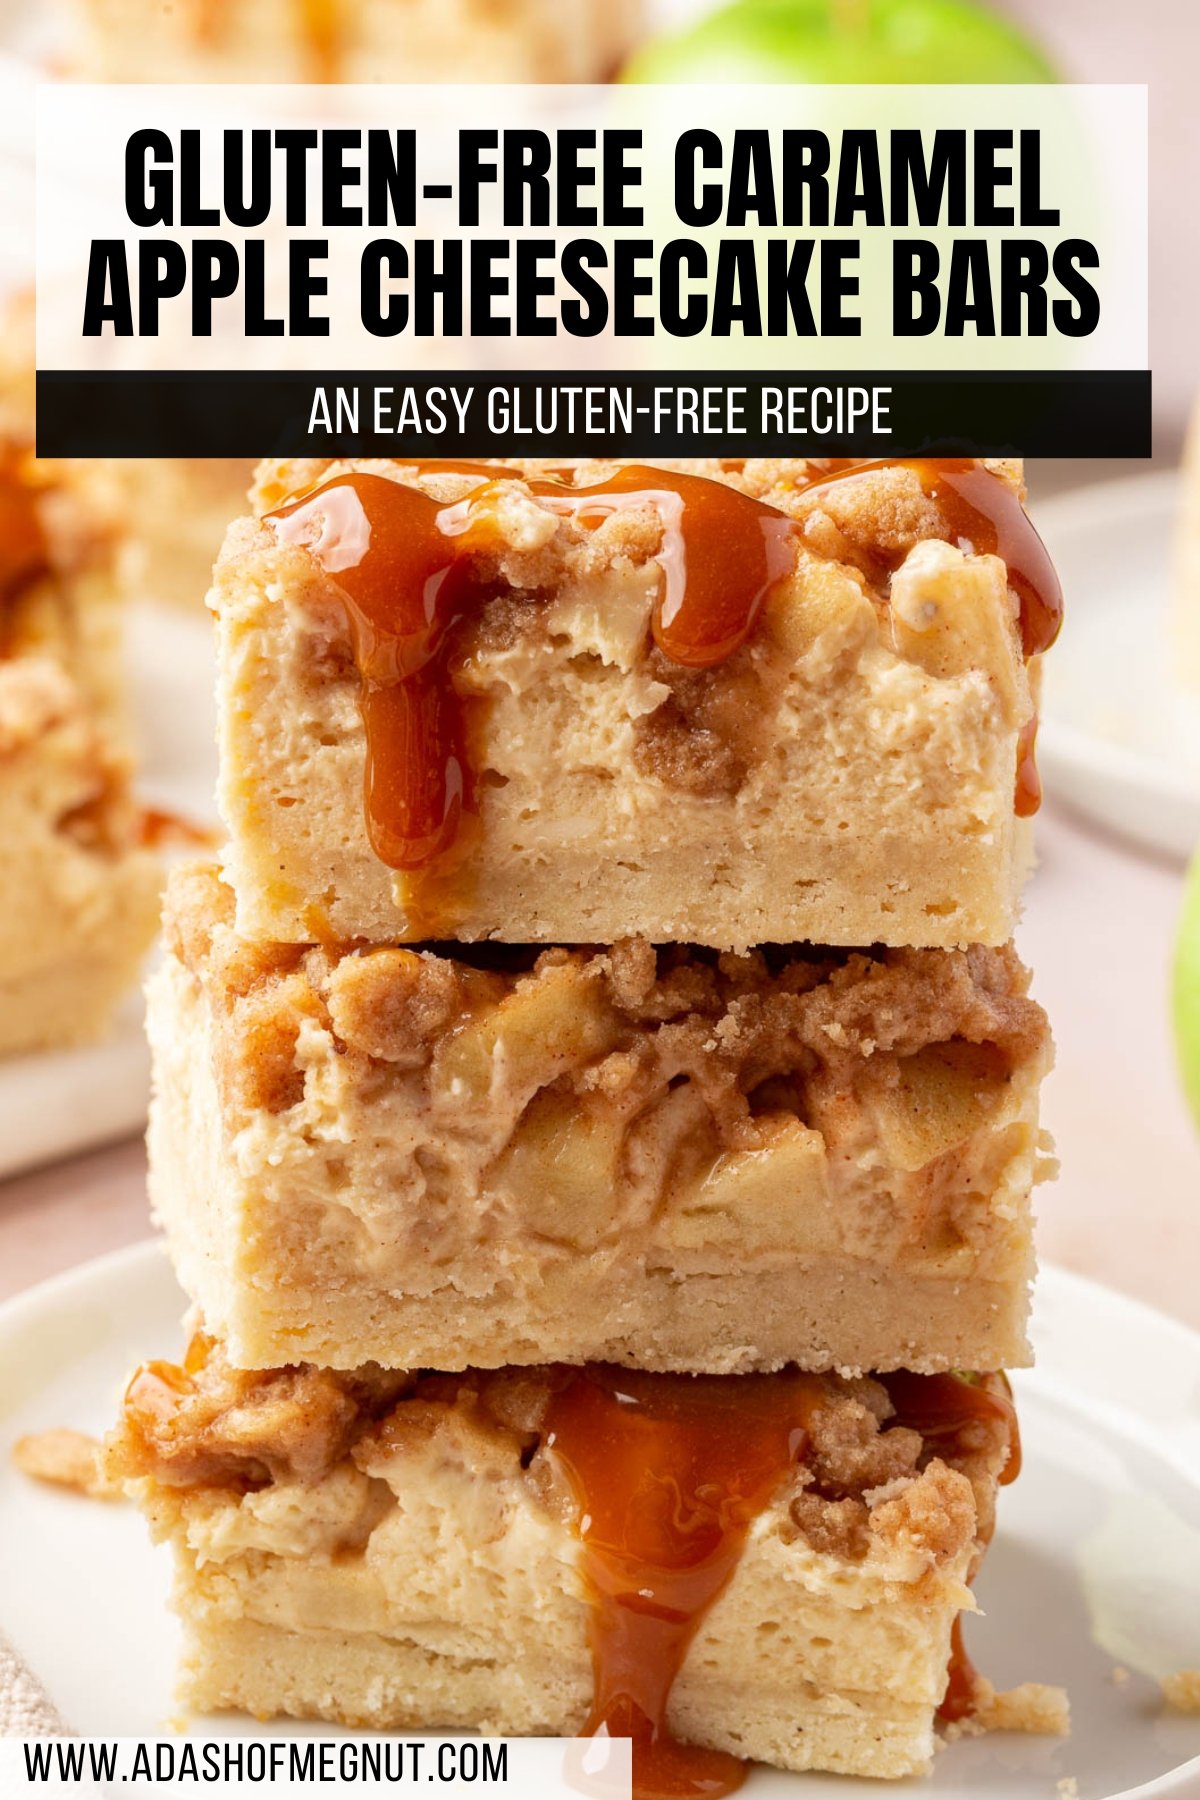 A stack of three apple caramel cheesecake bars with caramel and a gluten-free shortbread crust on a small dessert plate.